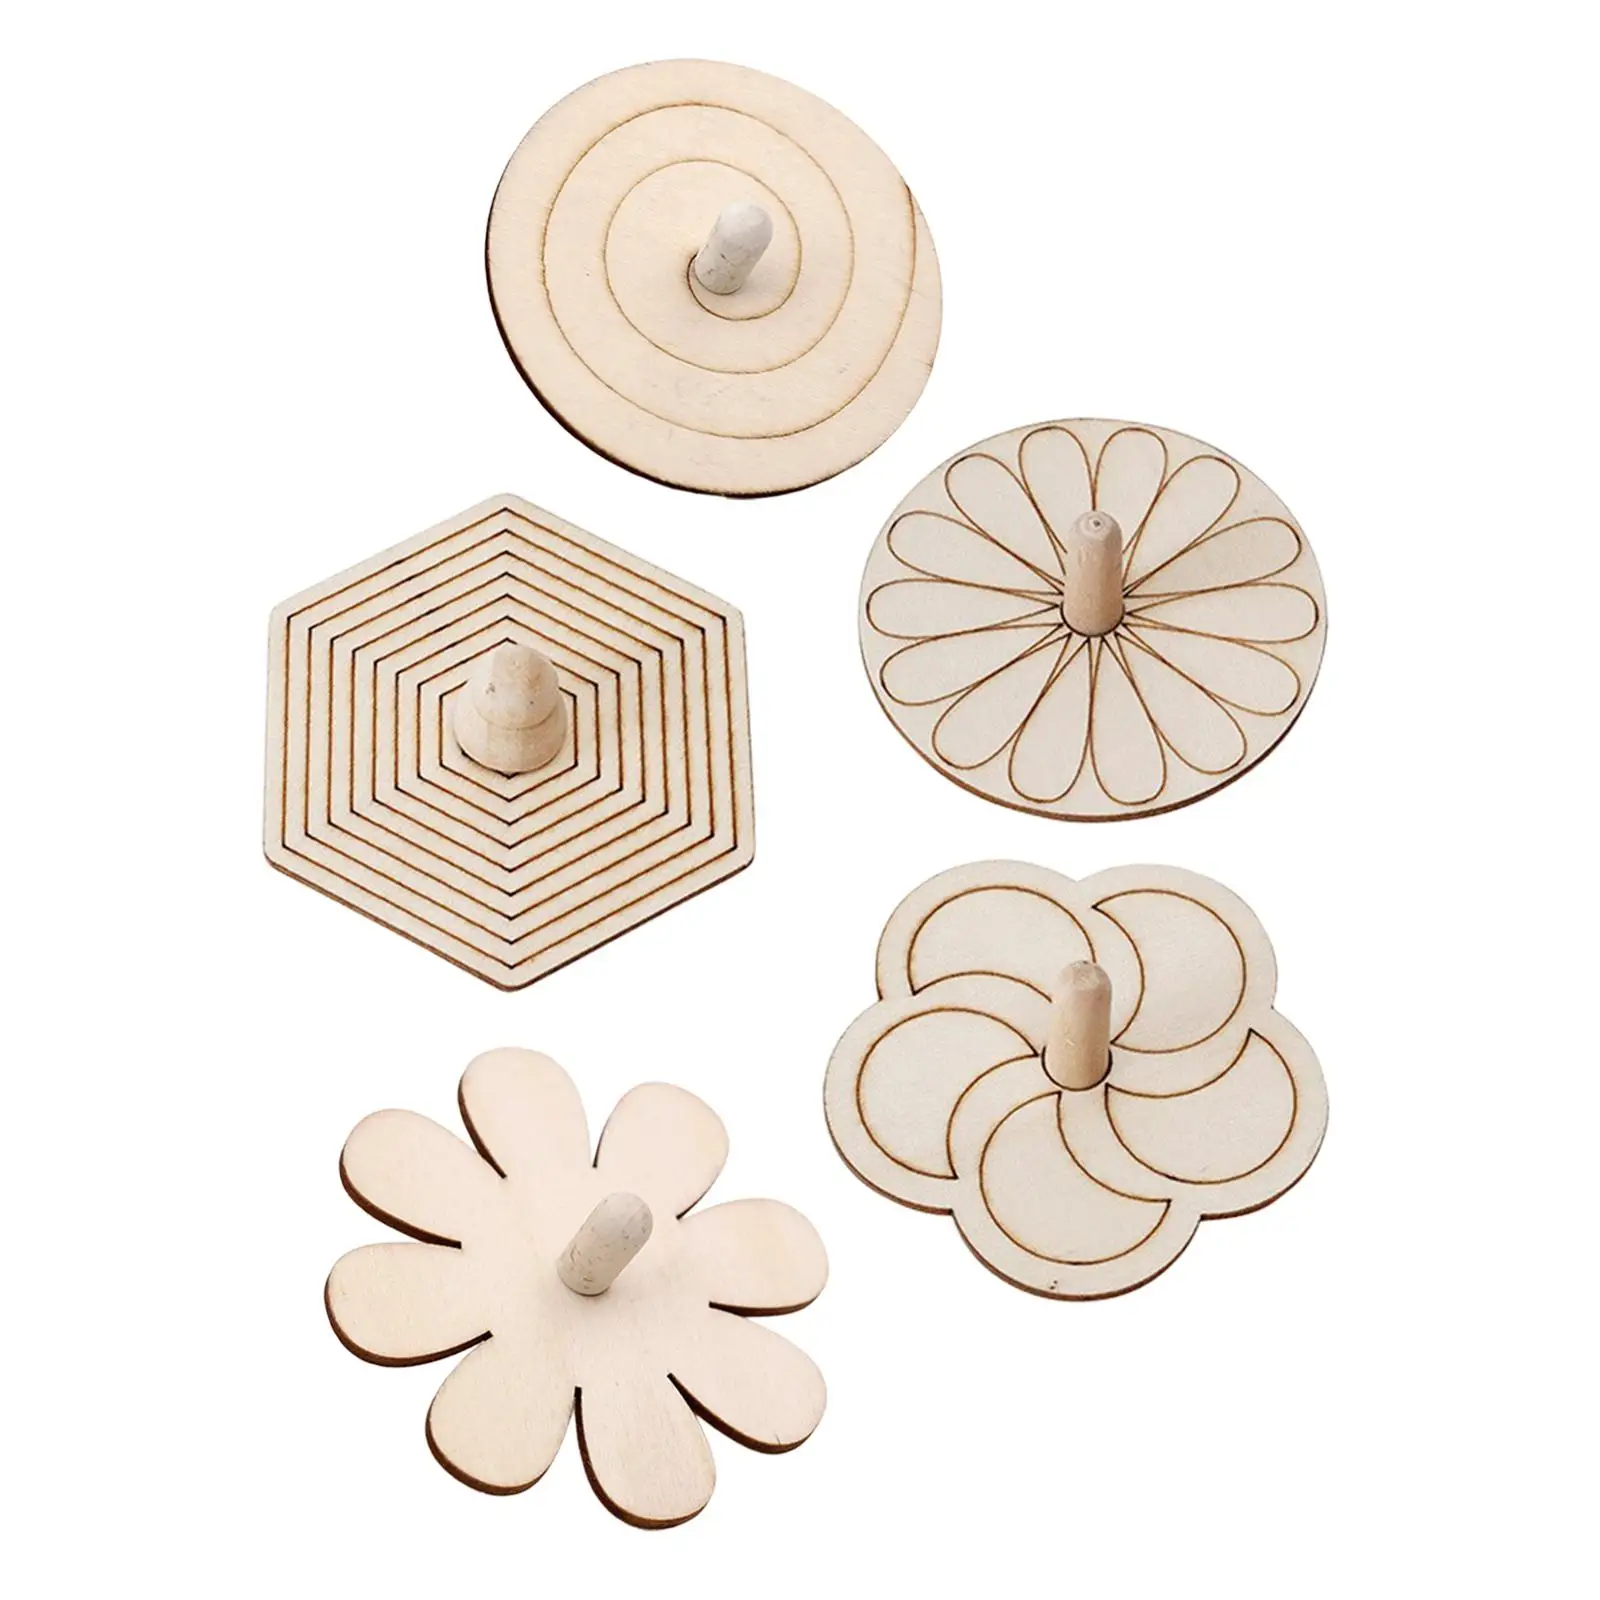 5Pcs Wooden Whirling Top Educational Painted Craft for Party Favours Kids